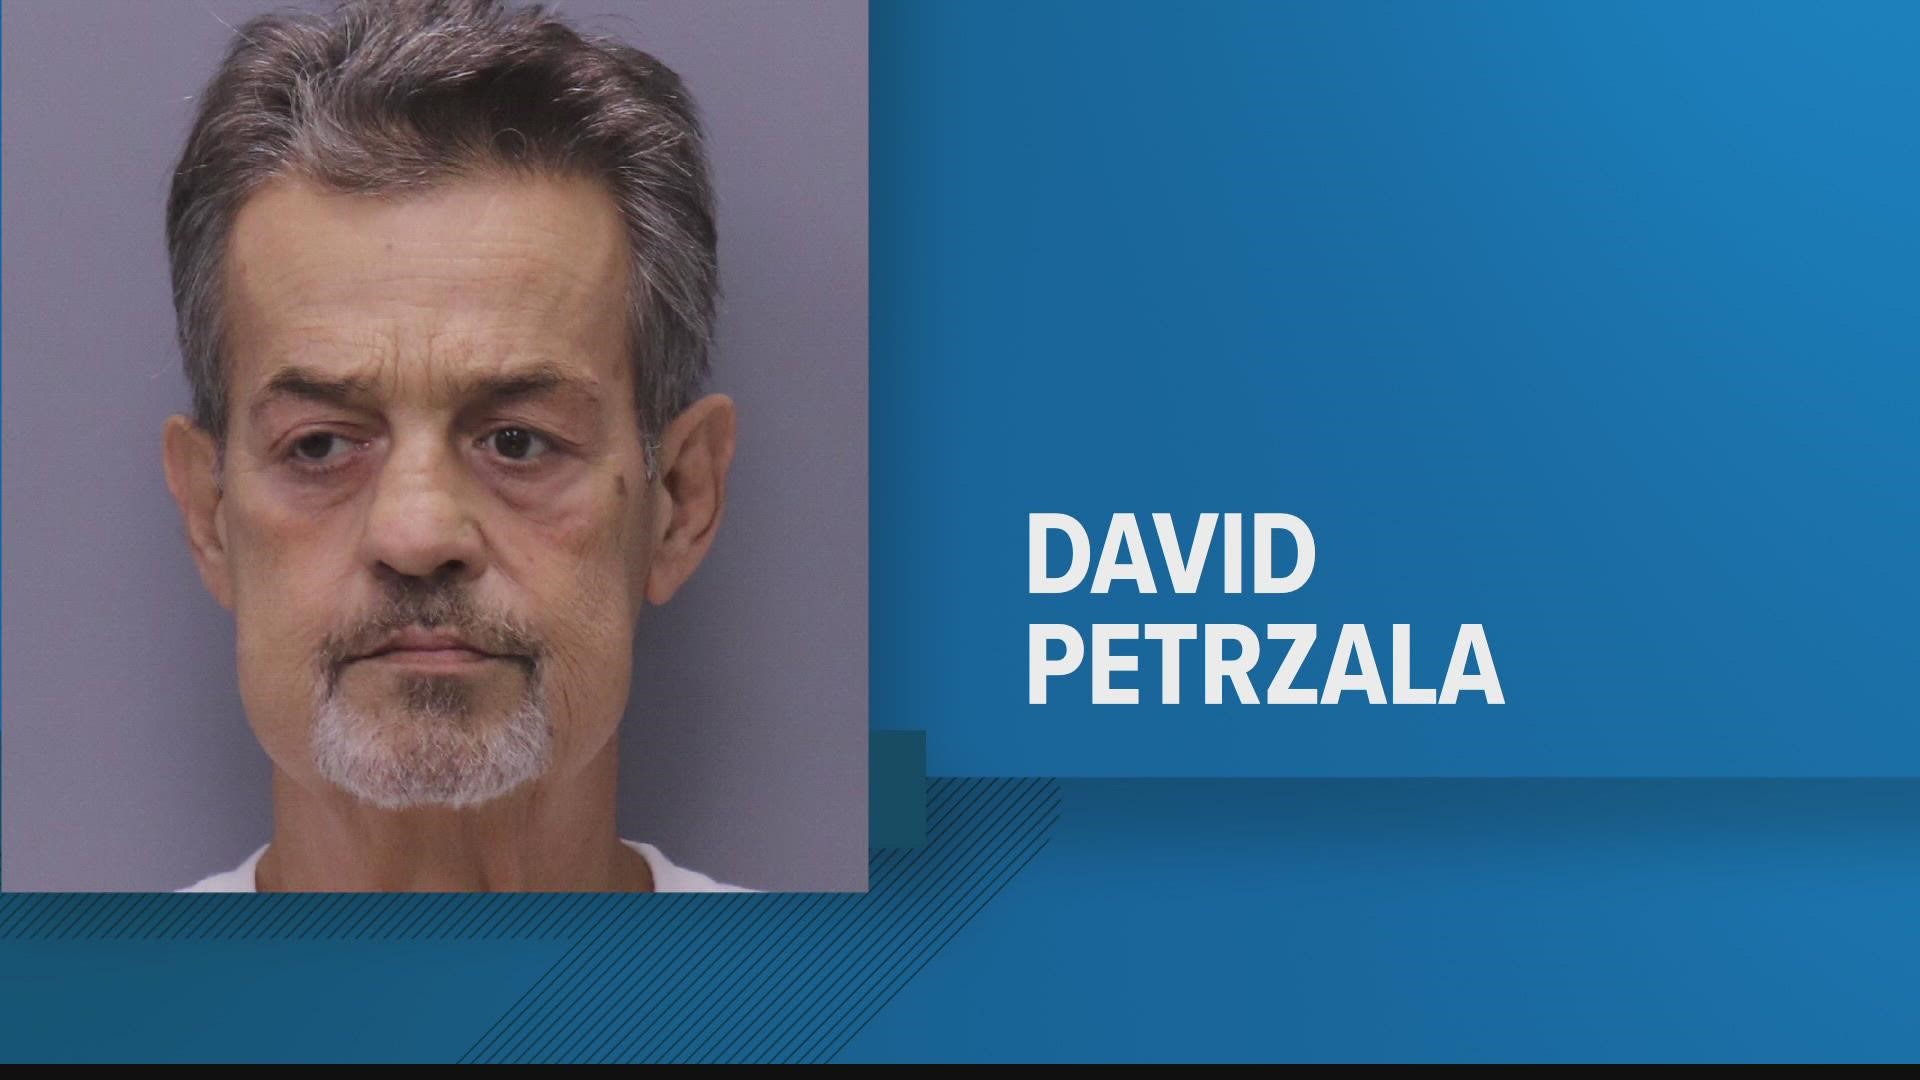 David Petrzala was arrested following an investigation by the Florida Highway Patrol.